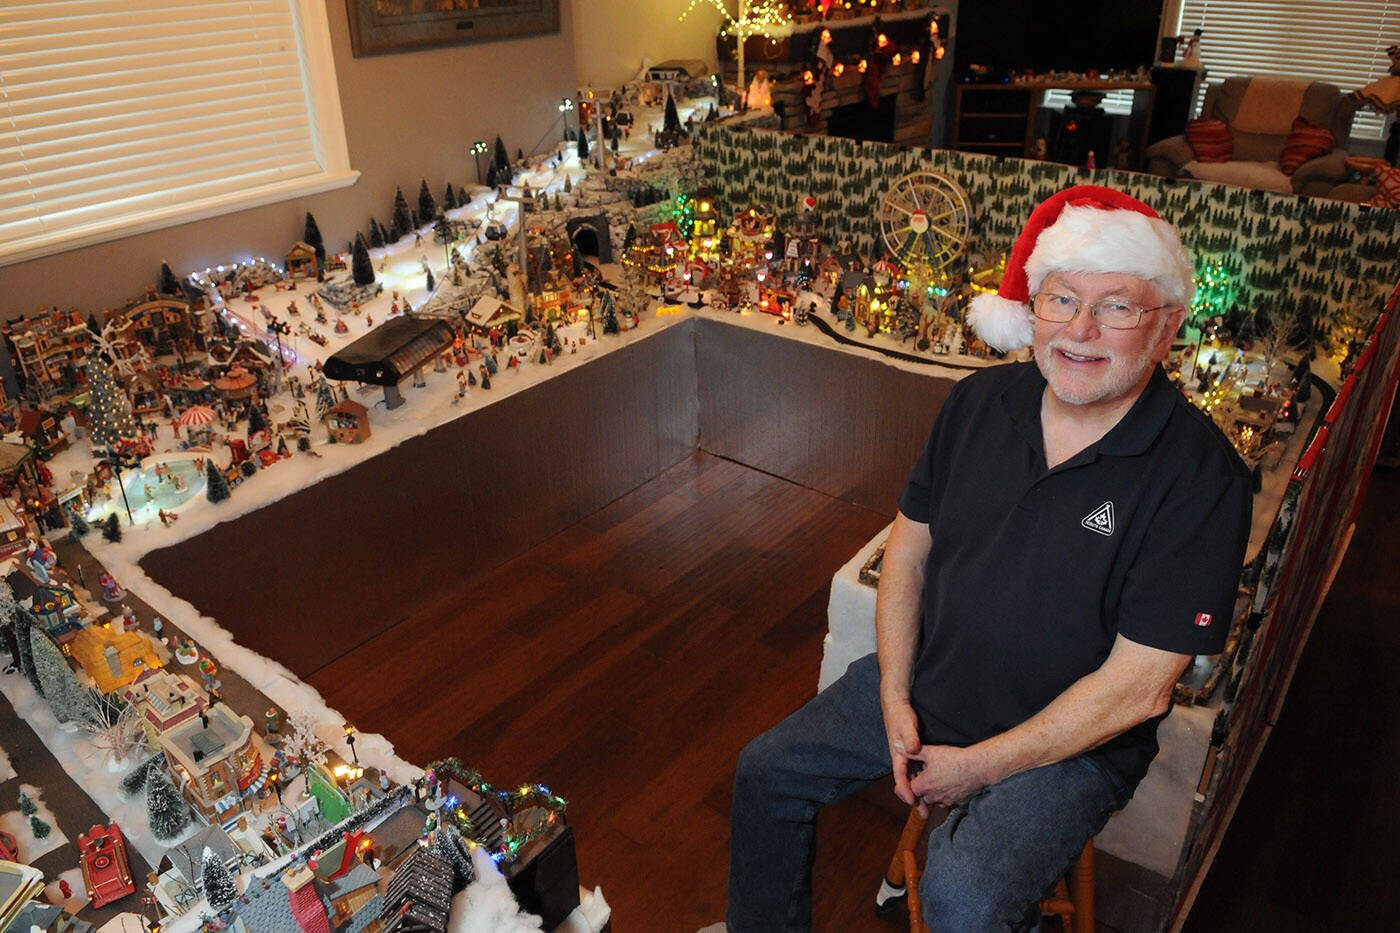 Terry Campbells display of Christmas miniatures takes up the entire dining room of his Chilliwack home. He started the display in 2007 but it has been more challenging for him lately as hes been legally blind since 2018. (Jenna Hauck/ Chilliwack Progress)